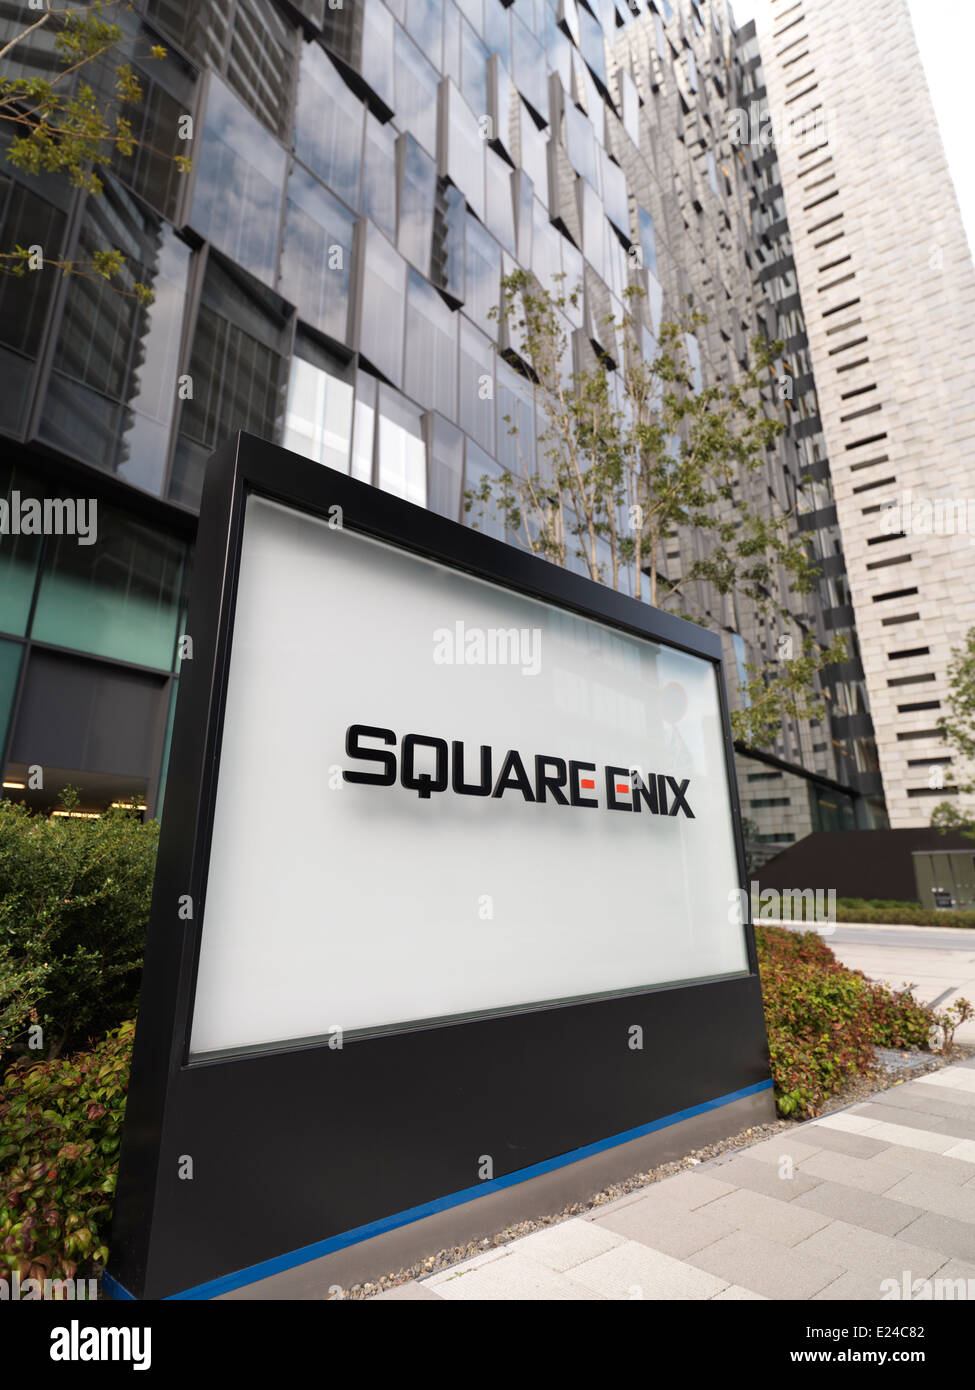 Square Enix company building sign in Tokyo, Japan. Stock Photo